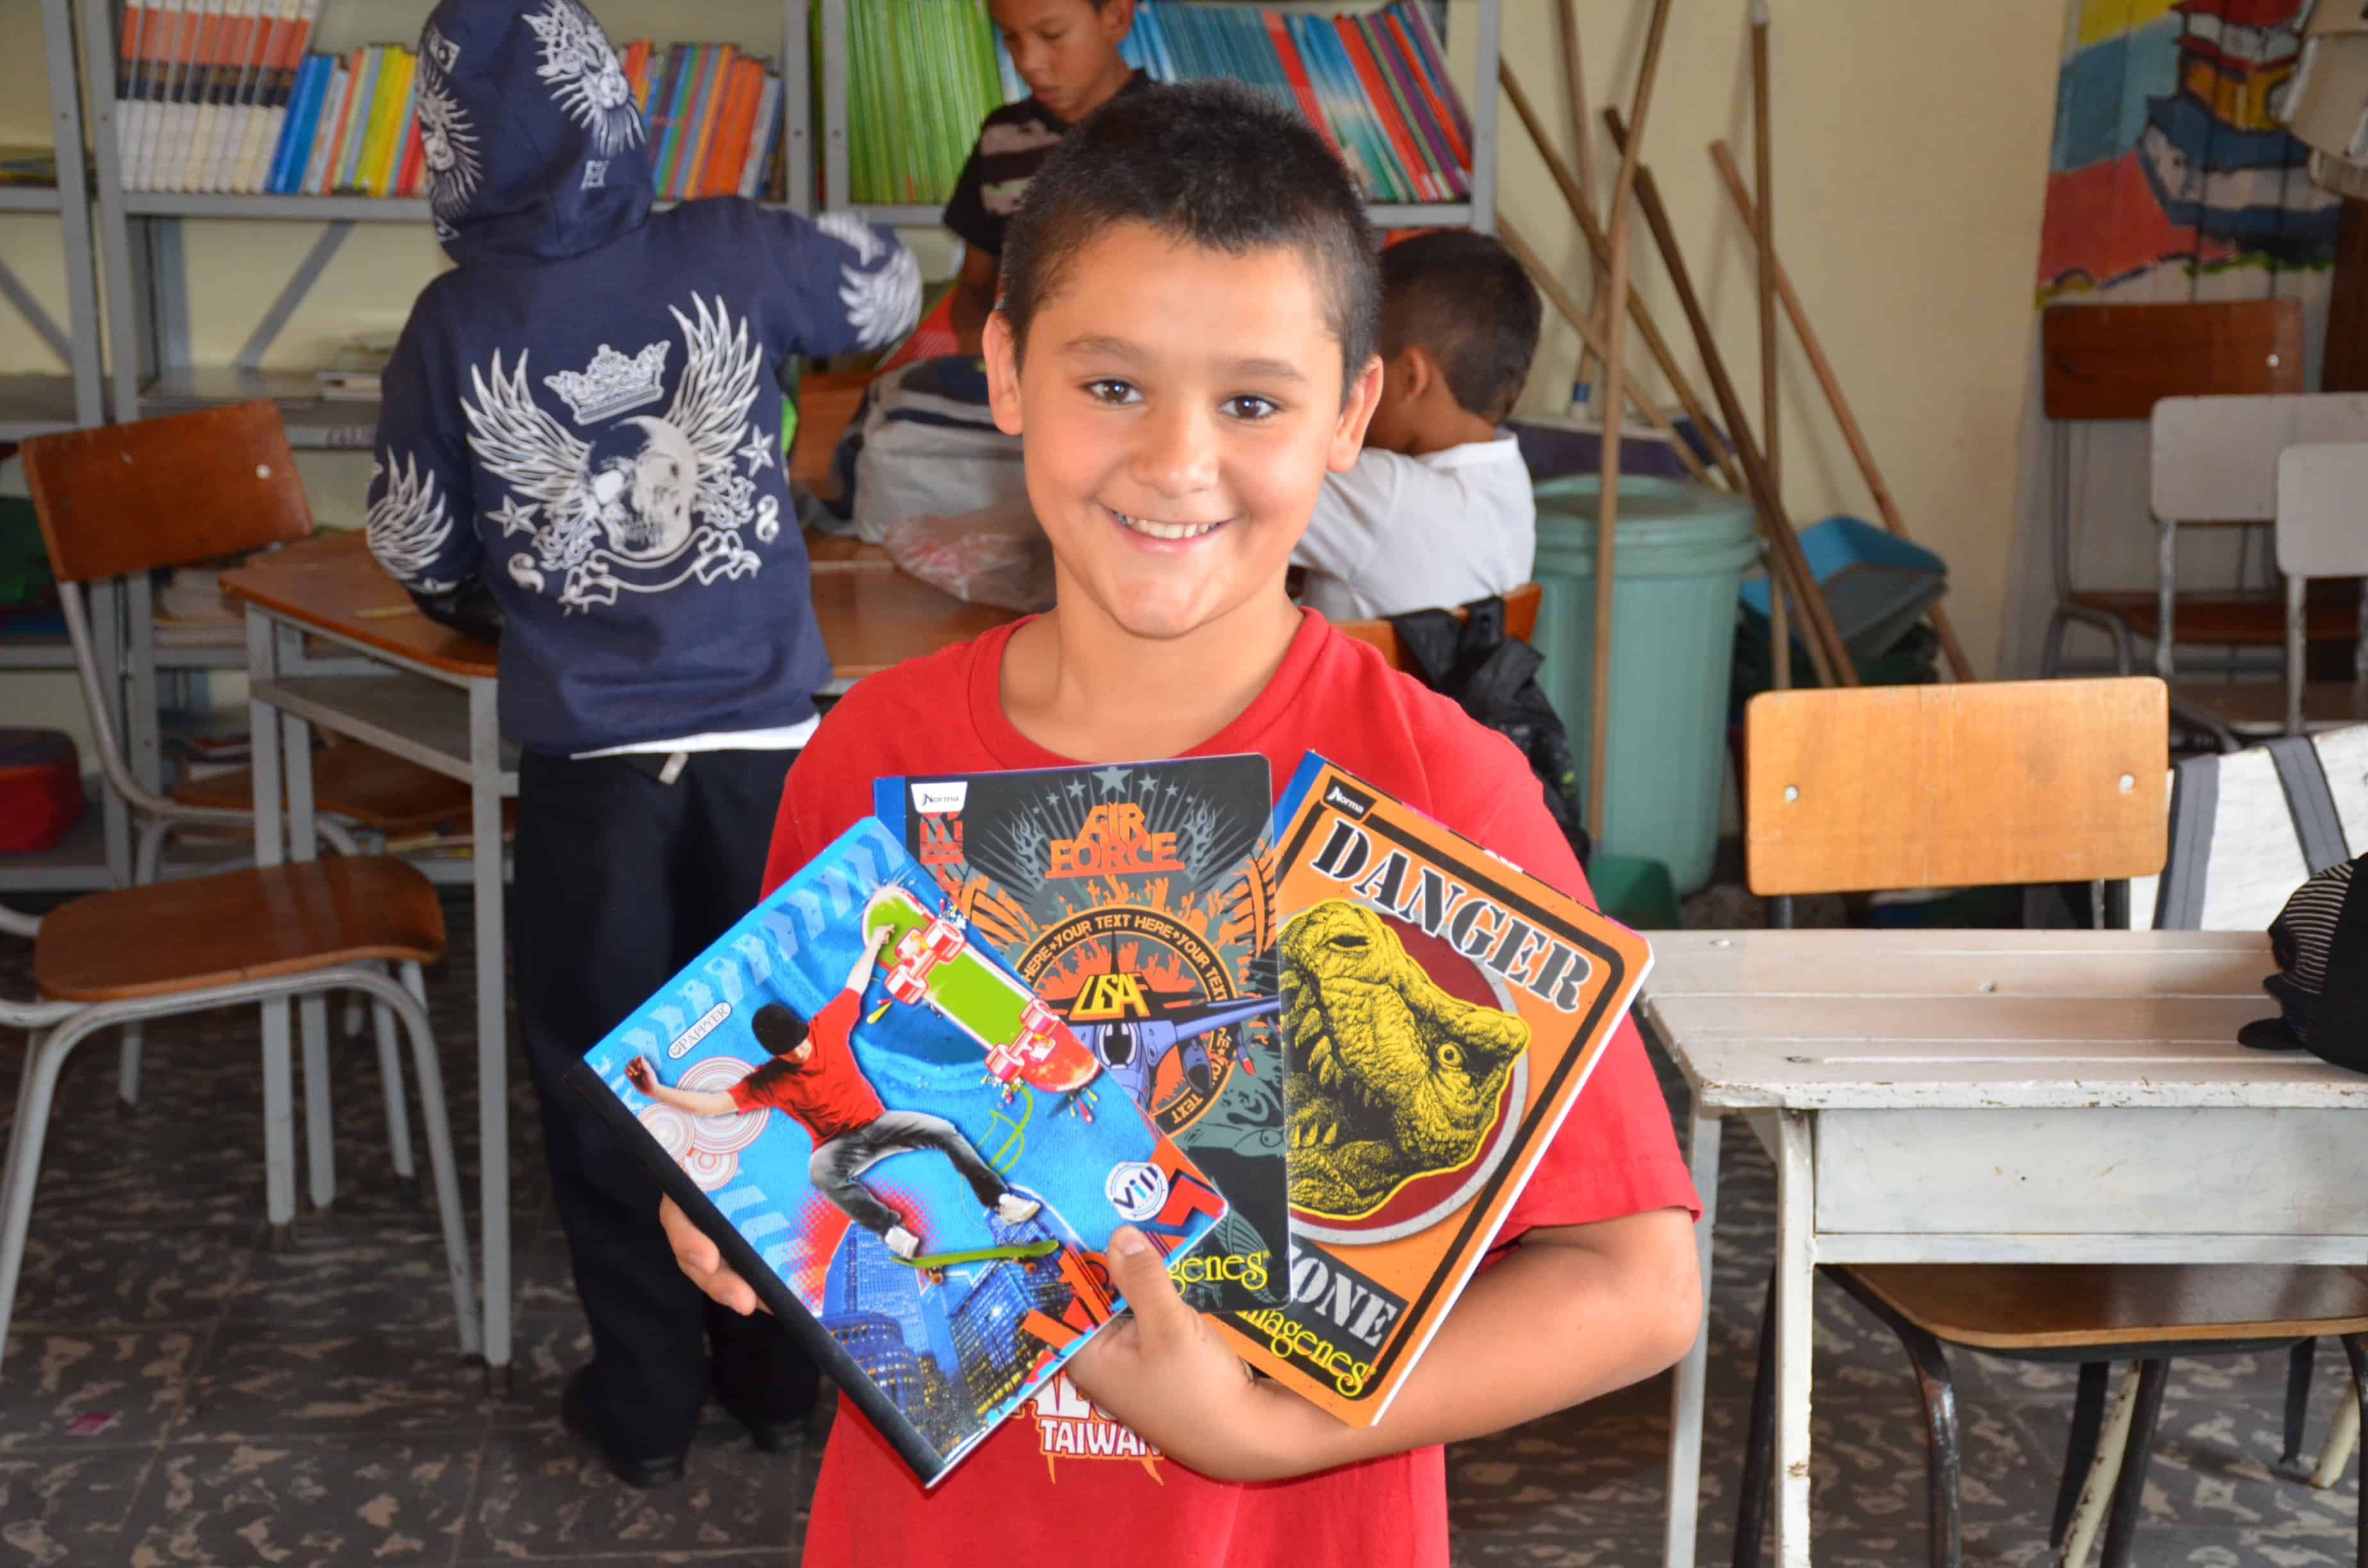 A student with his new notebooks in Belén de Umbría, Risaralda, Colombia